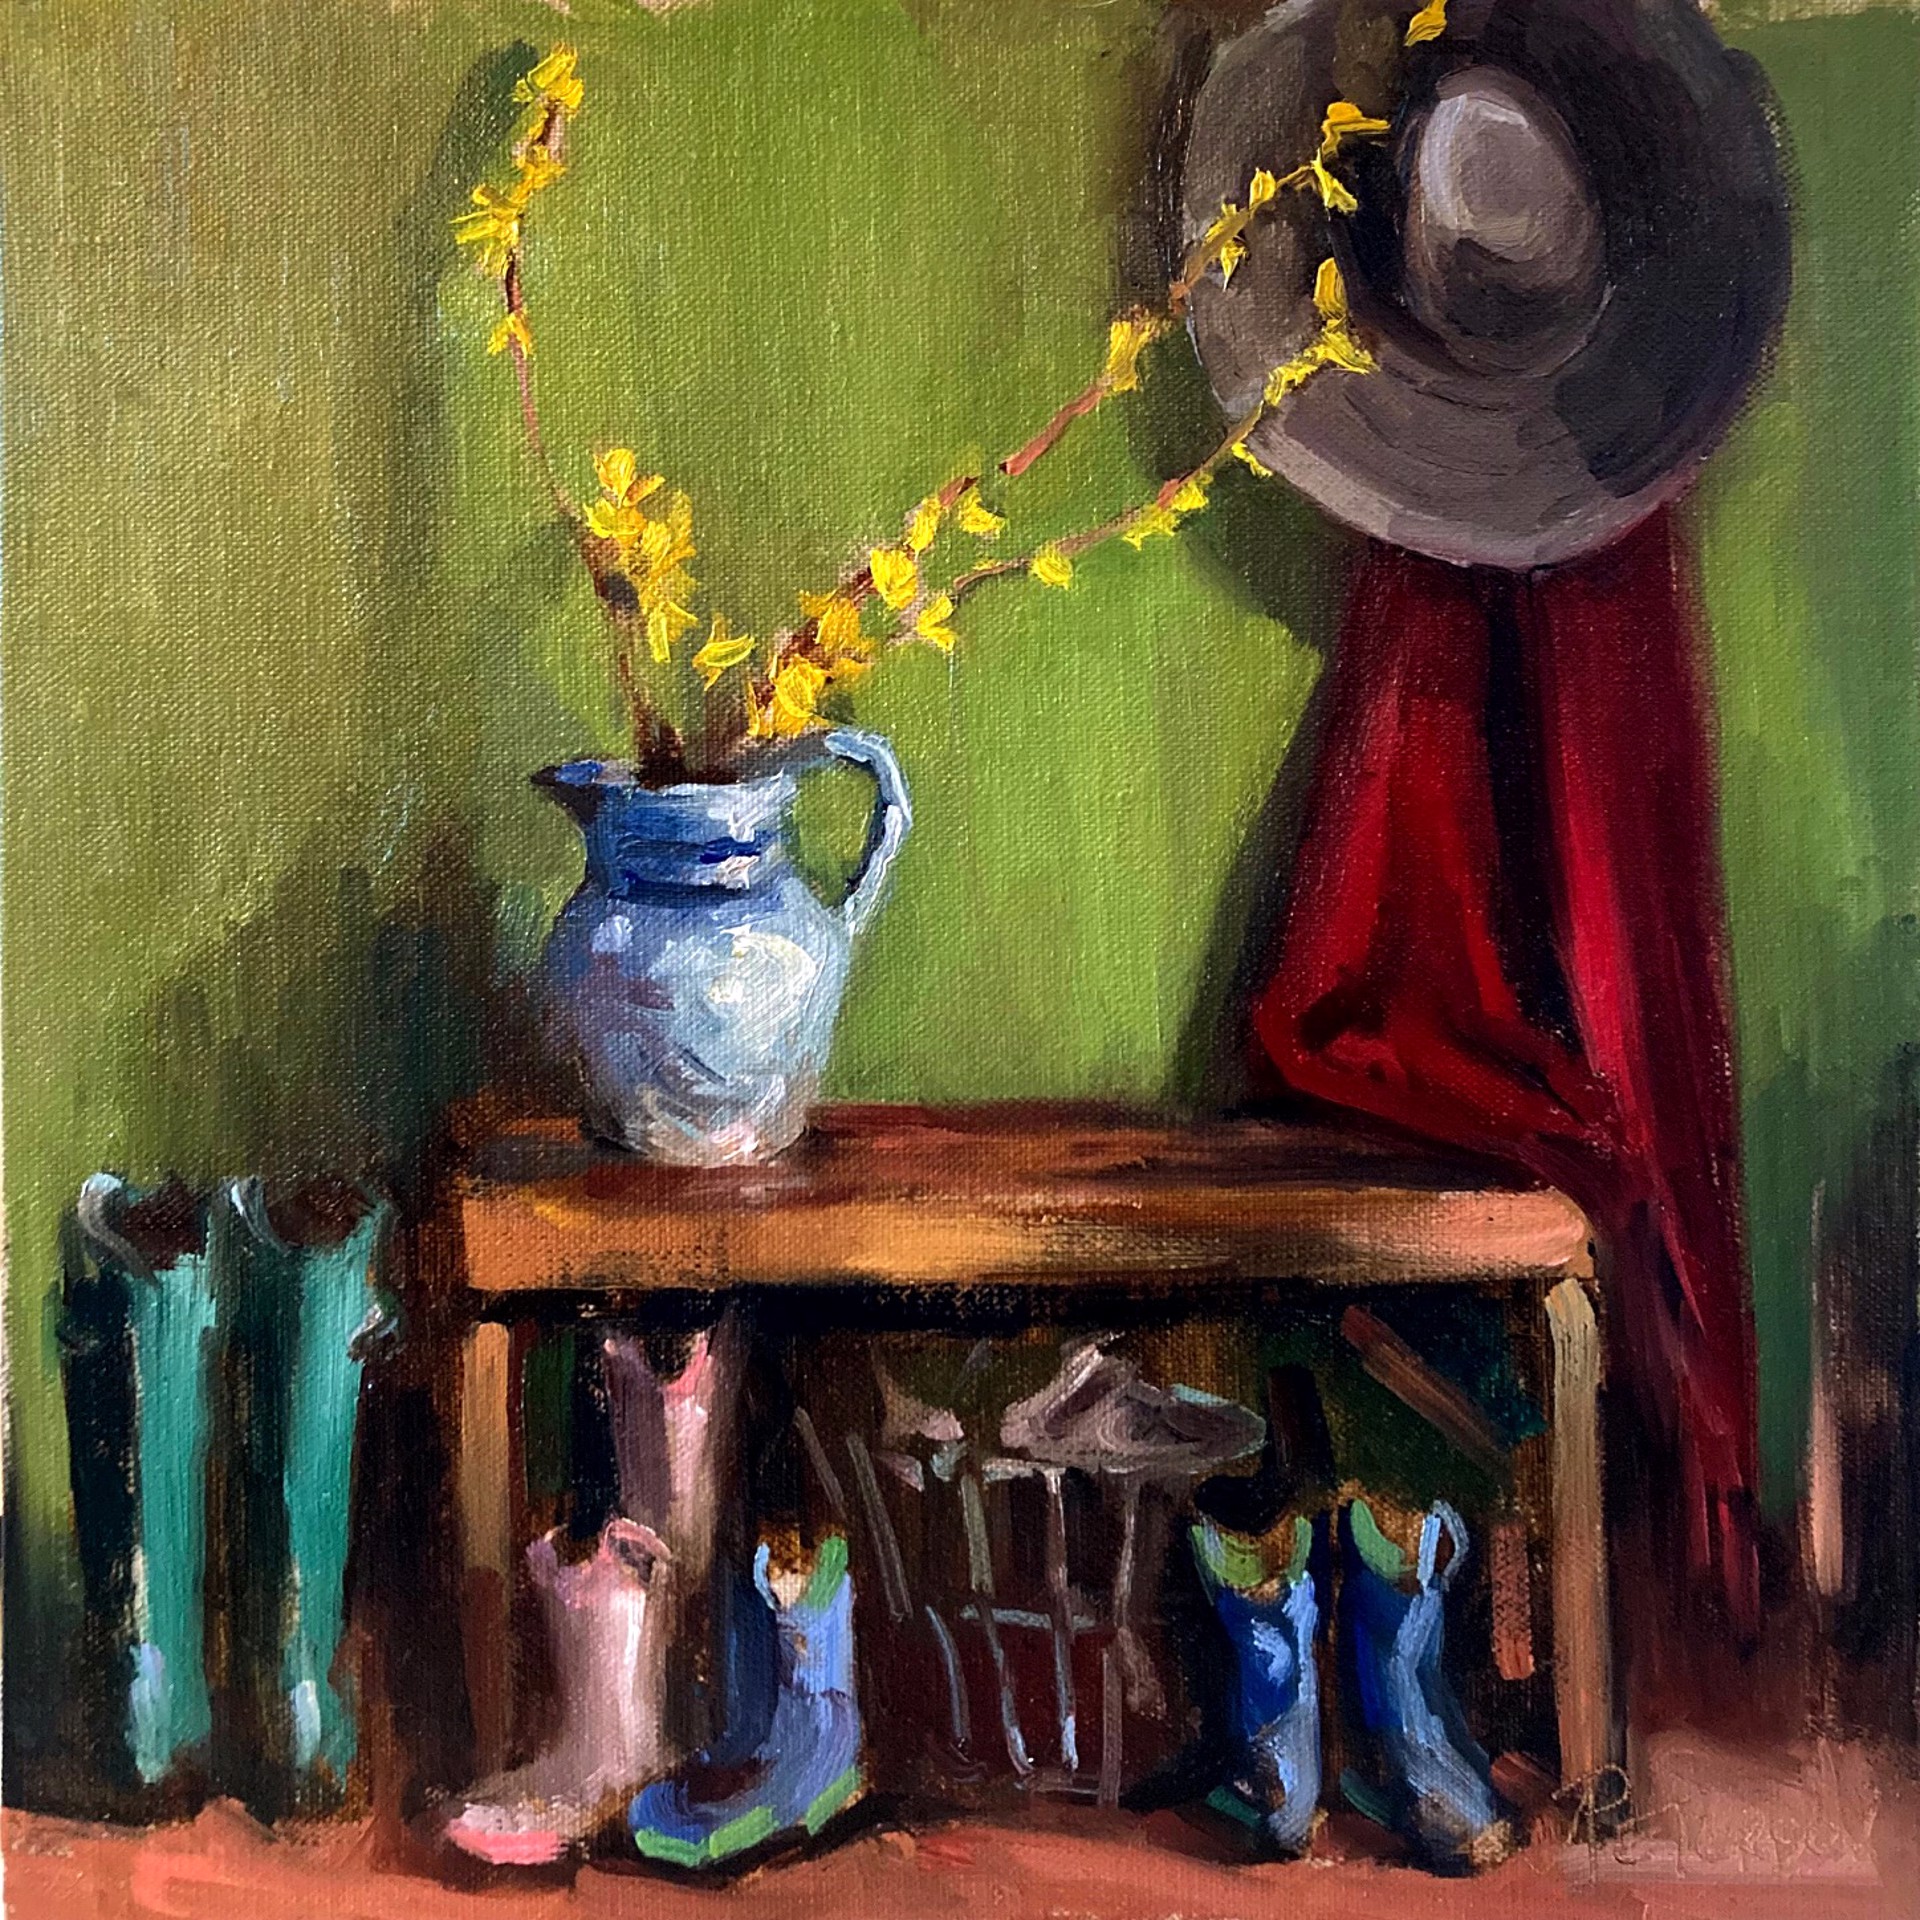 February's Forsythia by Amy R. Peterson